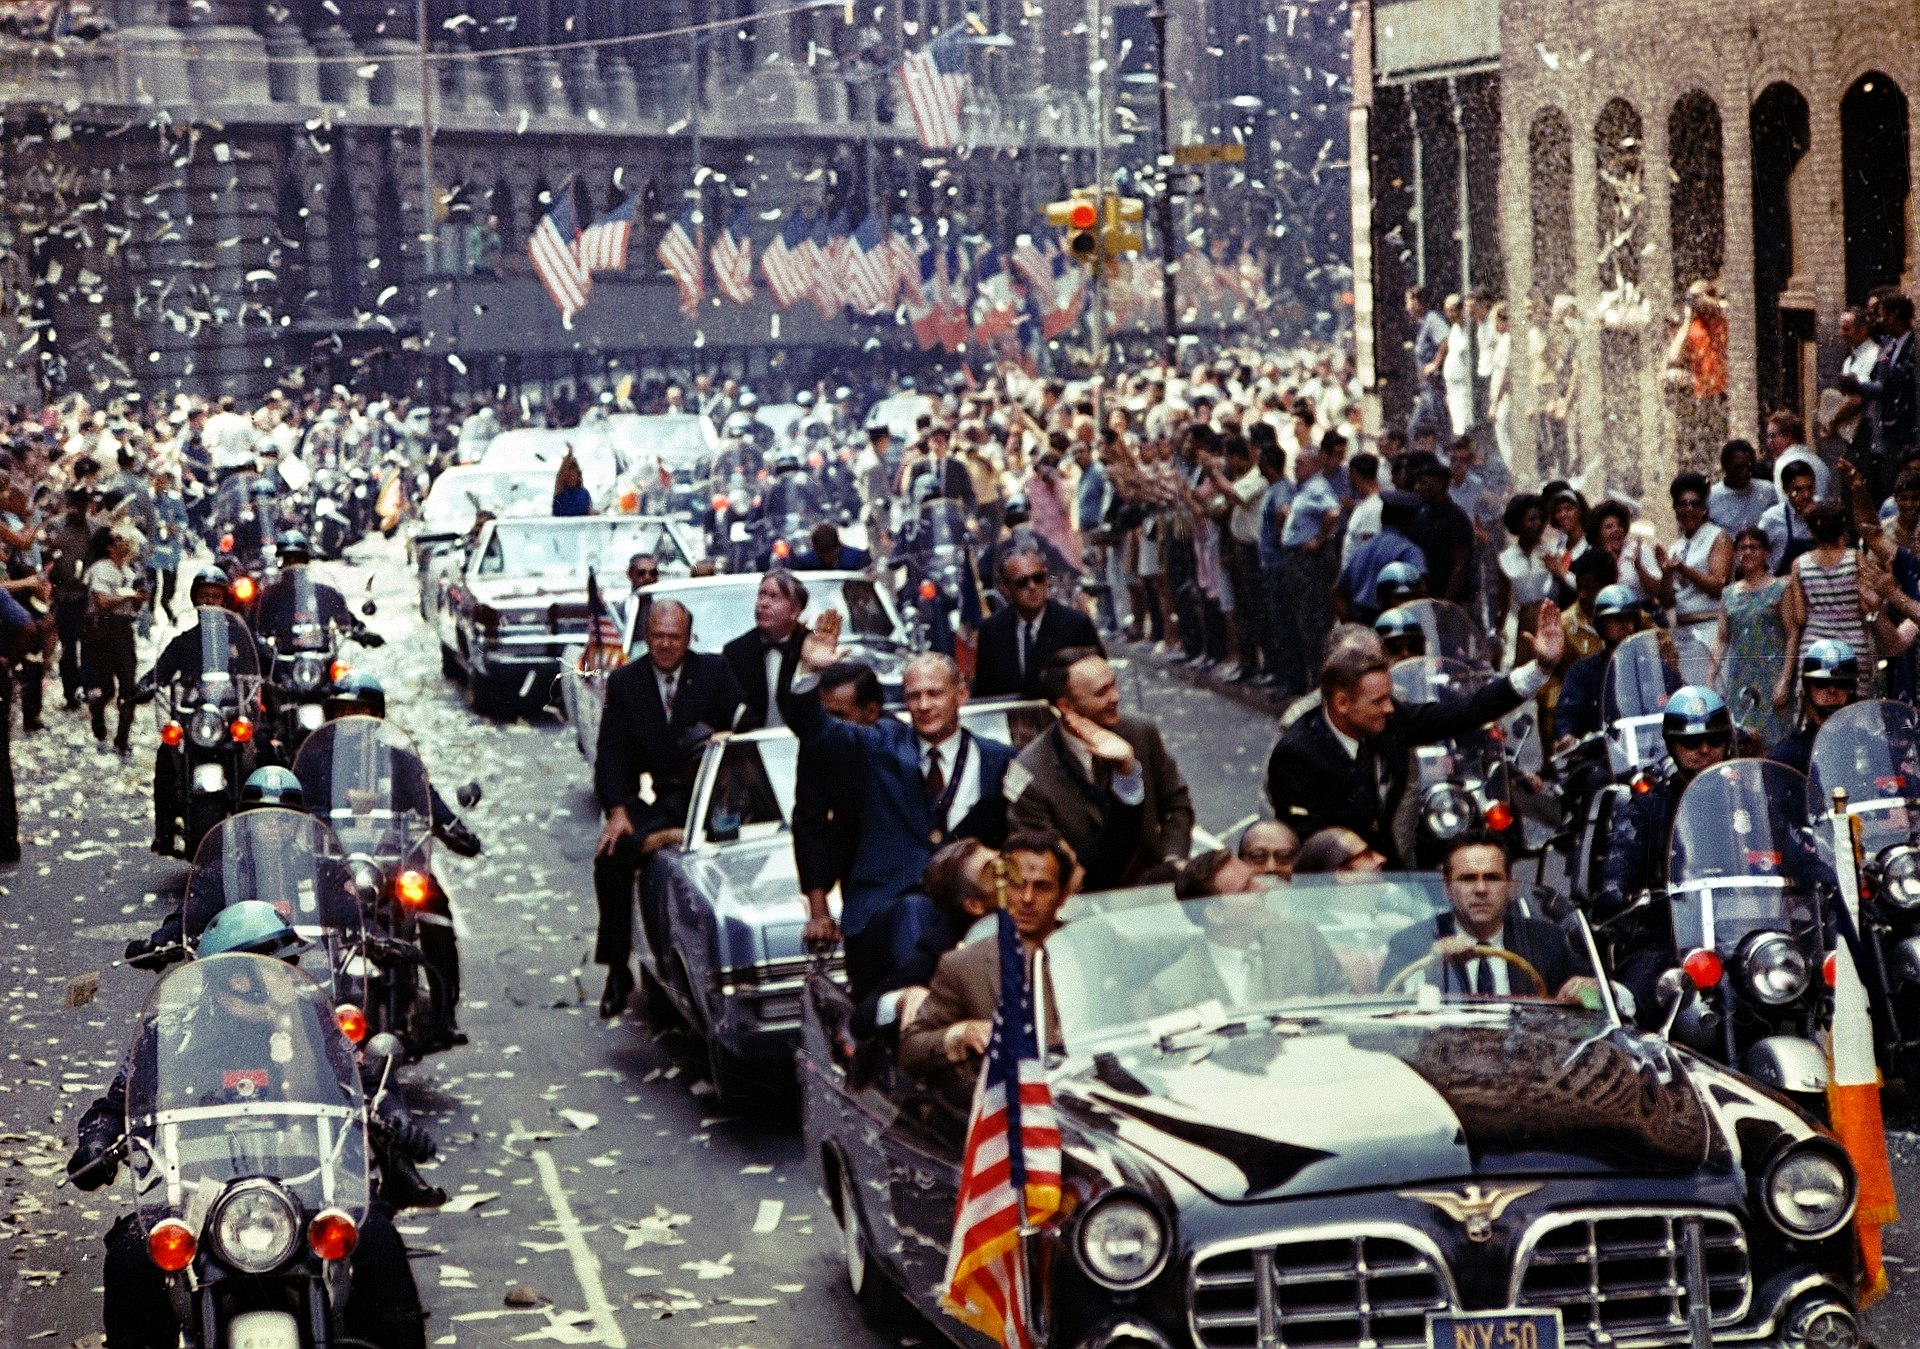 New York City in honor of the Apollo 11 astronauts, August 1969